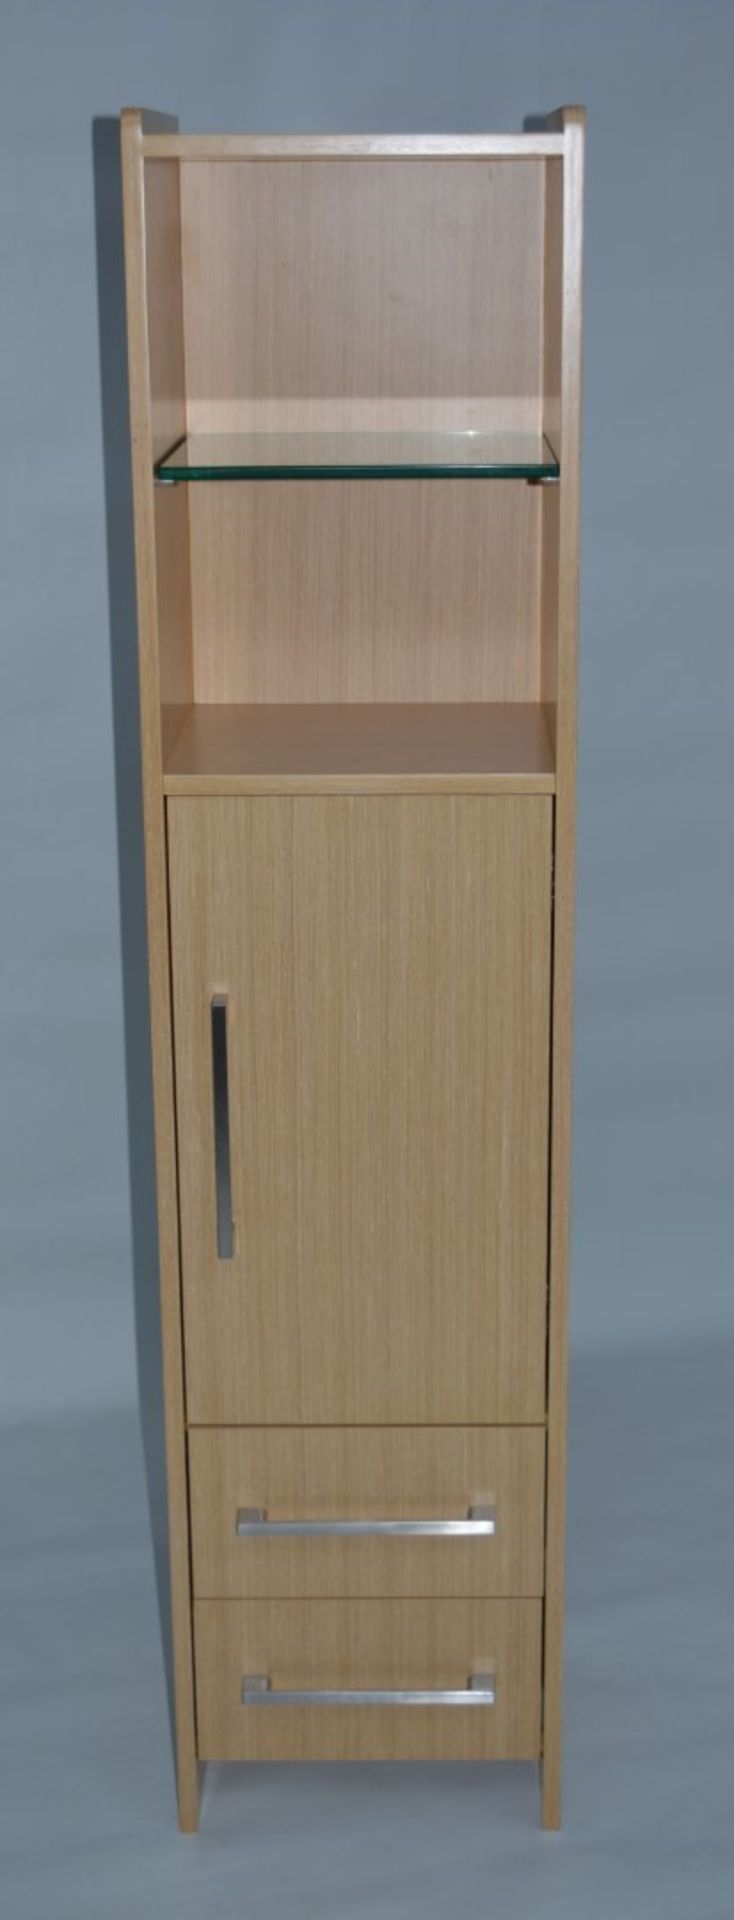 1 x Vogue ARC Series 2 Upright TALL BOY Bathroom Cabinet - OAK FINISH - Manufactured to the - Image 3 of 5